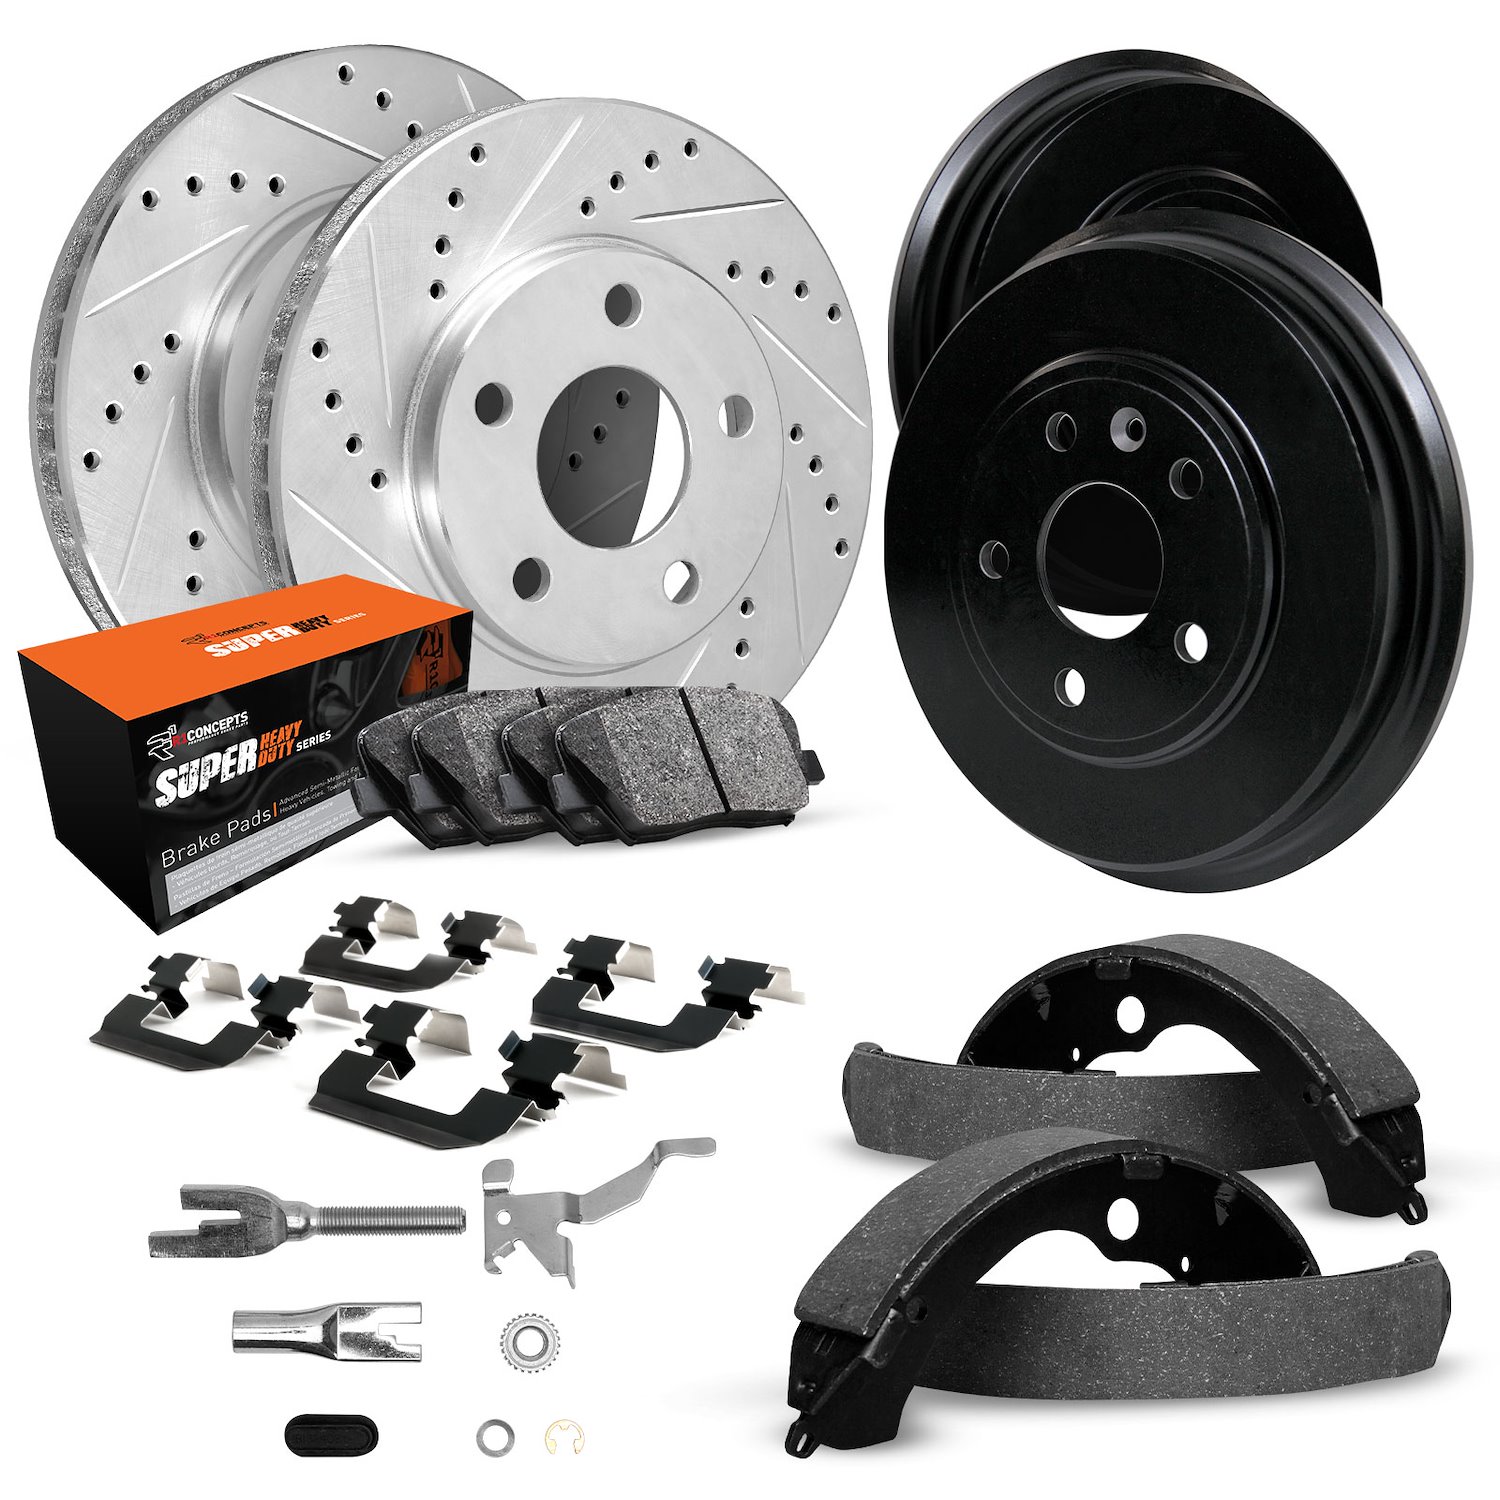 E-Line Drilled/Slotted Silver Rotor & Drum Set w/Super-Duty Pads, Shoes/Hardware/Adjusters, 1985-1987 Mopar